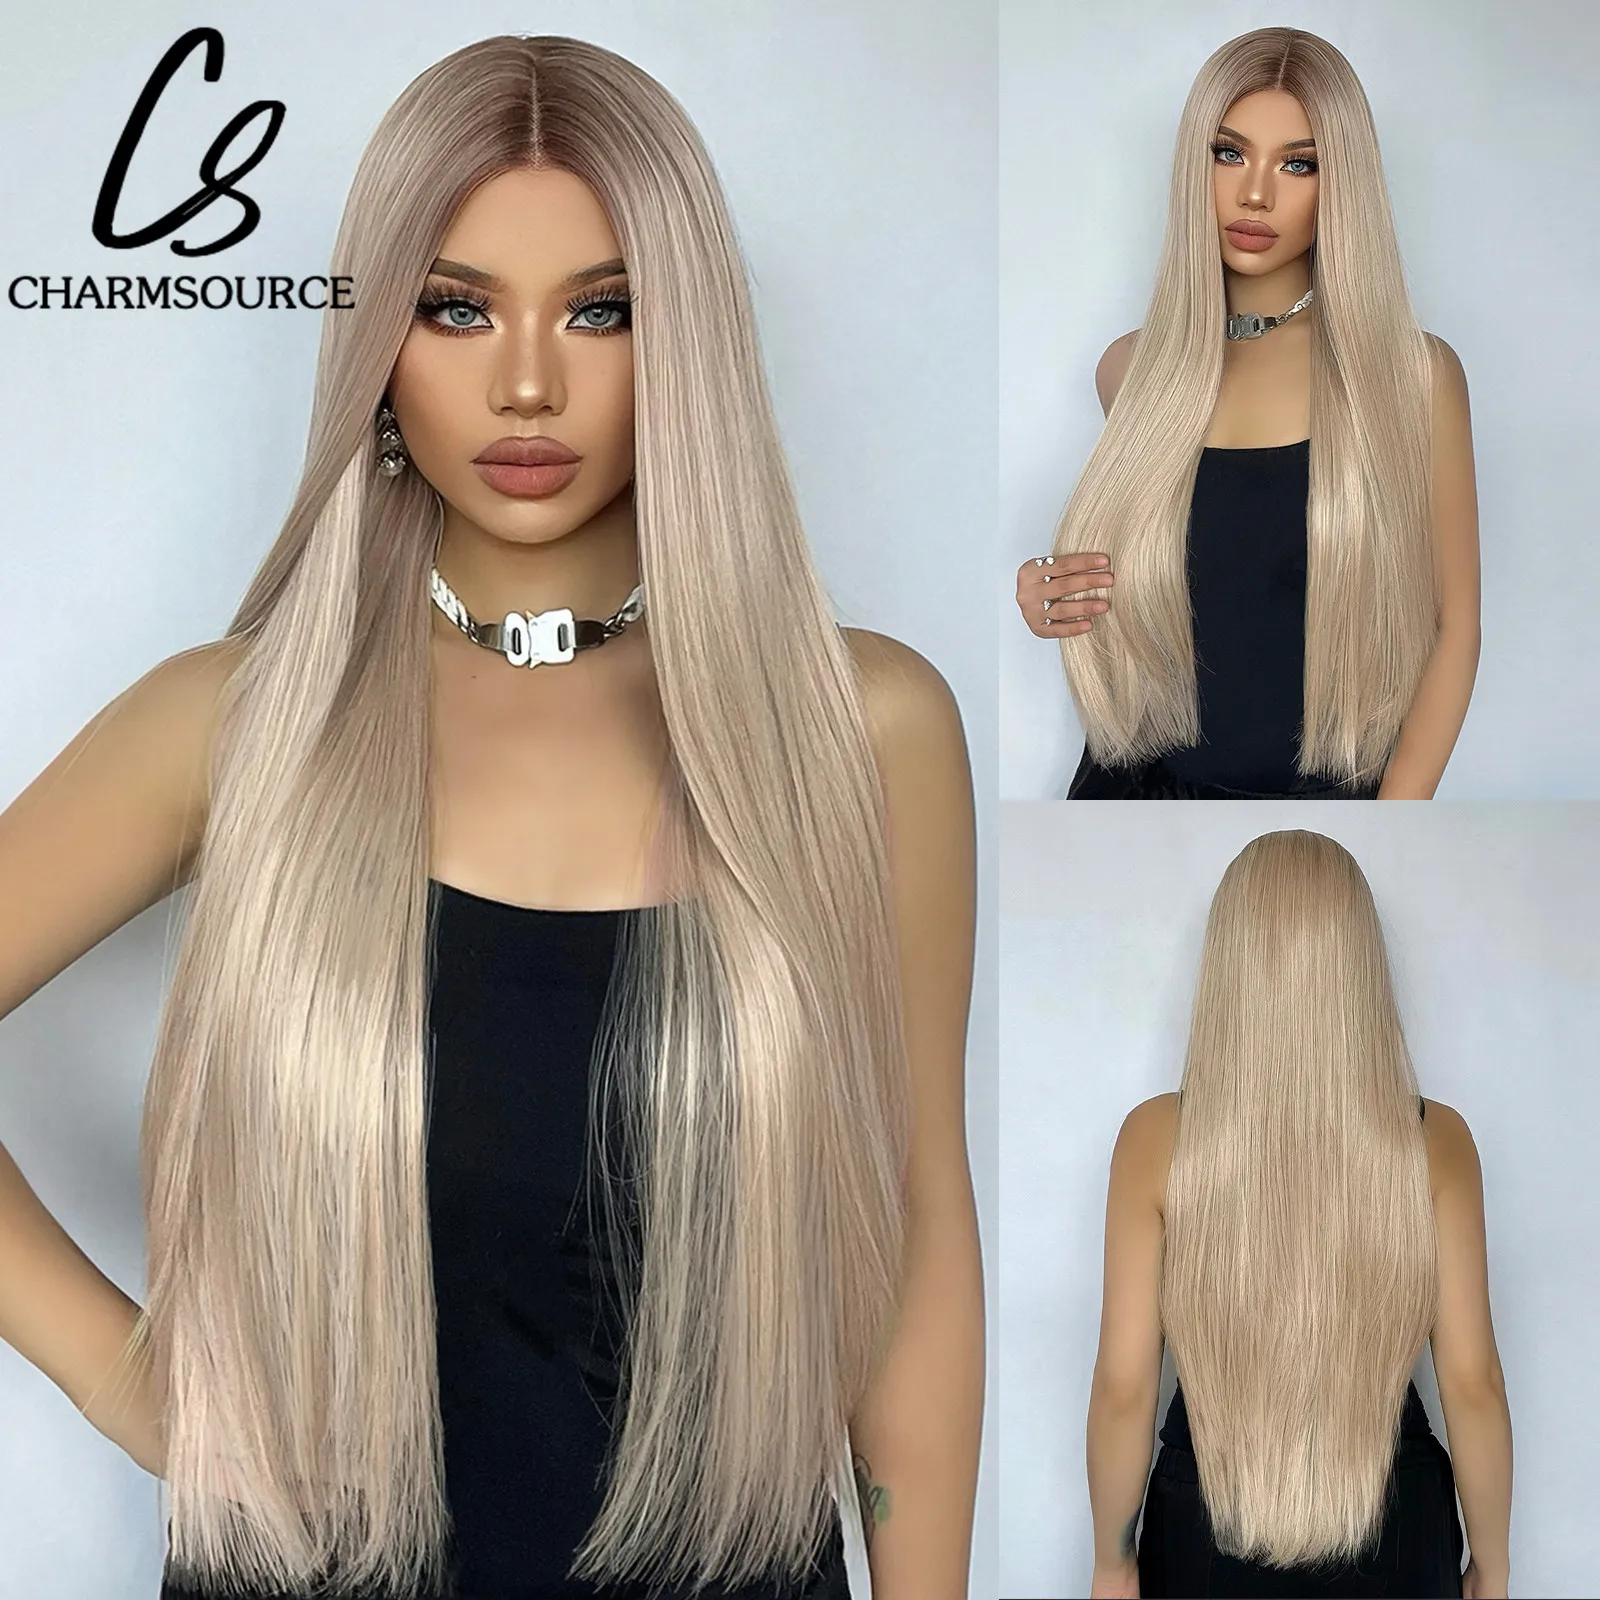 

CharmSource Super Long Lace Front Wig Straight Blonde Wigs with Dark Root for Women Daily Party Cosplay Wedding High Density